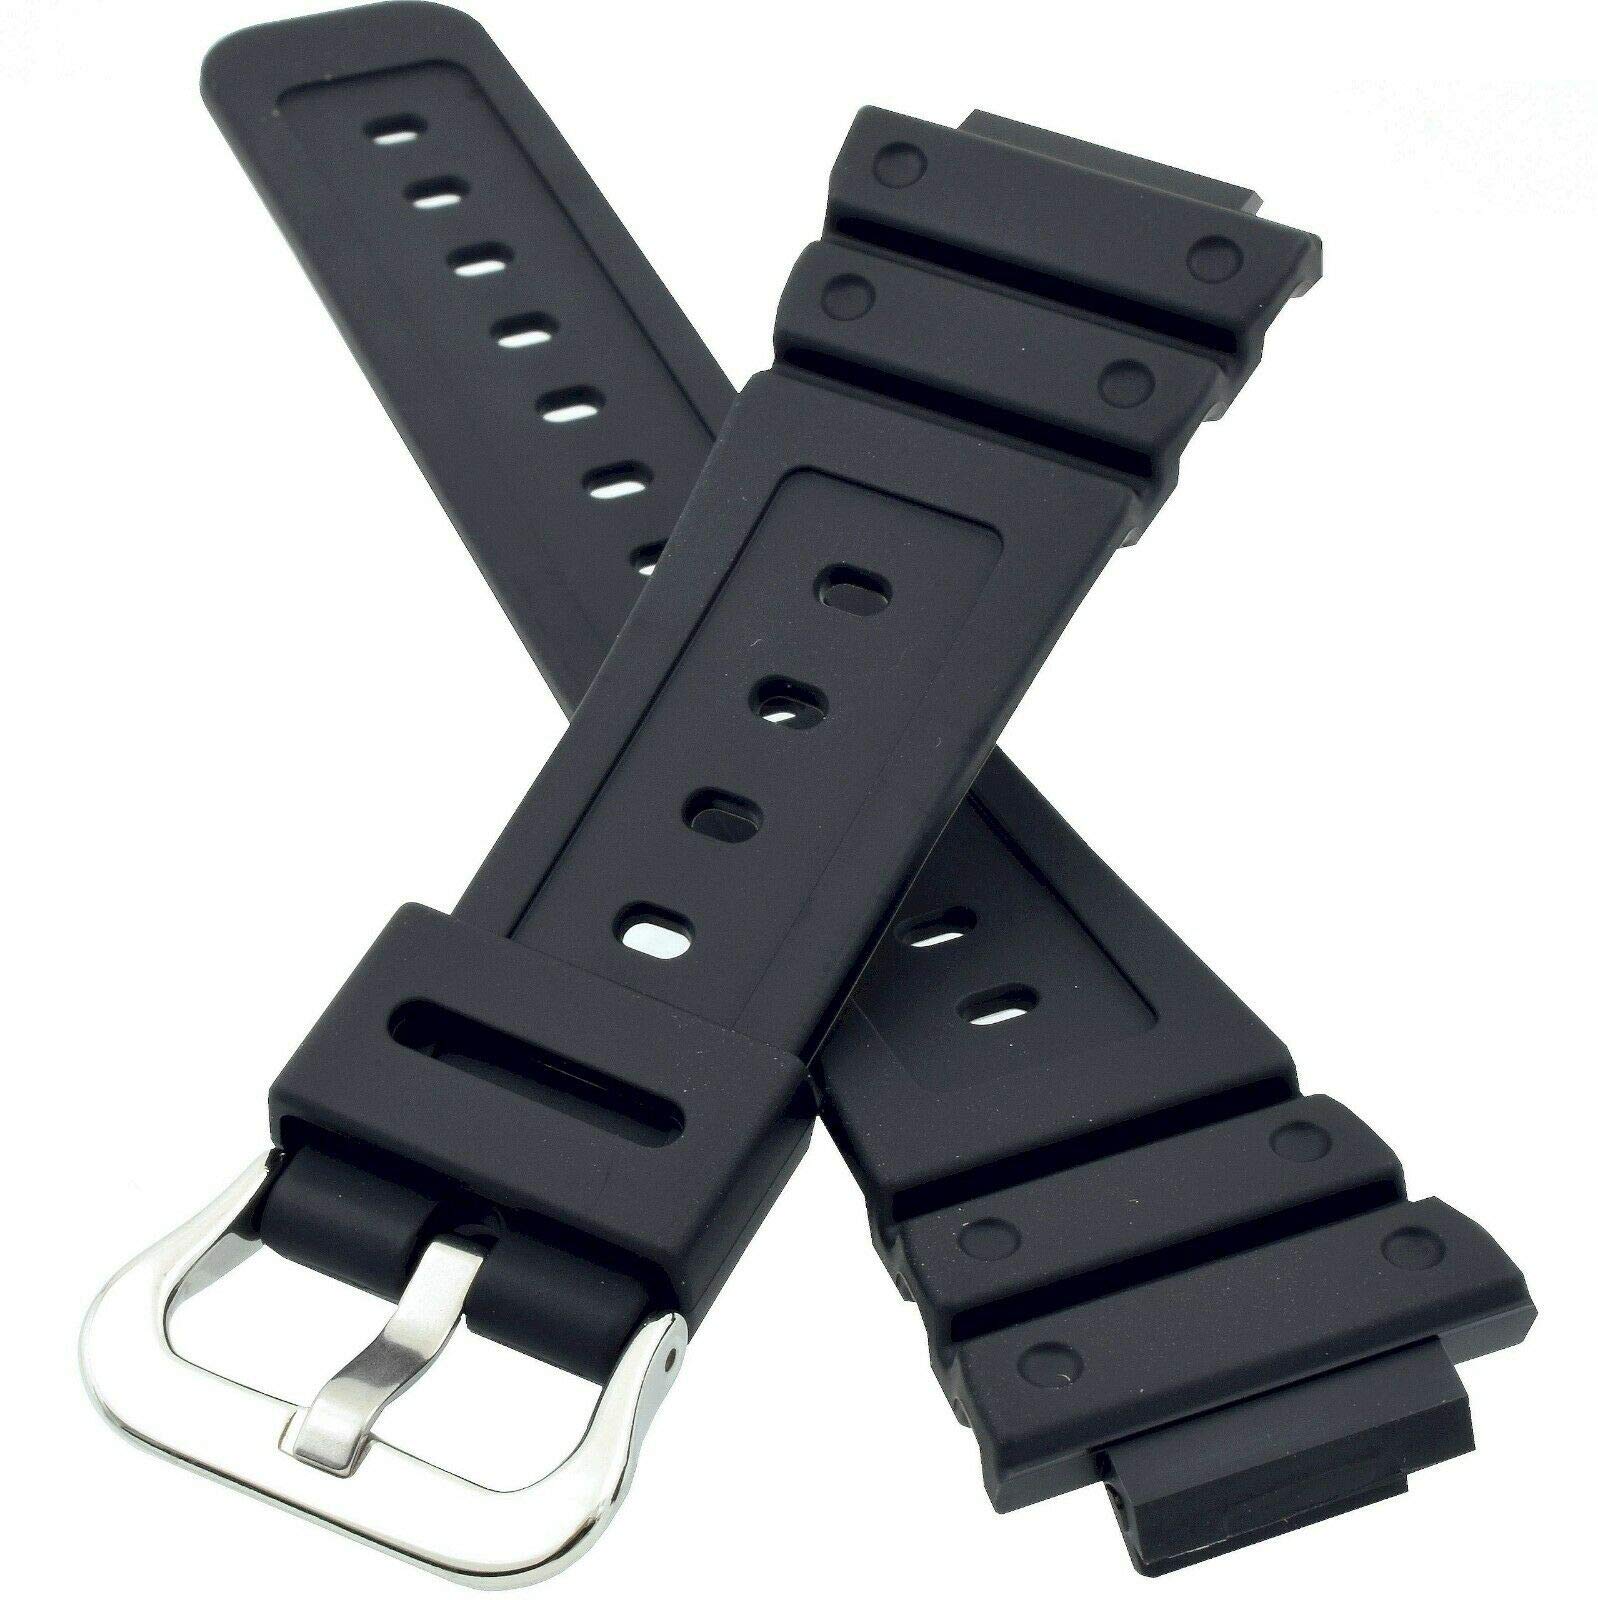 16mm x 26mm Replacement Watch Band Strap Fits DW-5600 DW-5600E DW-5000 DW-5700 GW-M5600 G-5700 G-5600 G-5700 | DW5600 DW5600E G5700 G5600 DW5700 | DW 5000 5600 5700 DW M5600